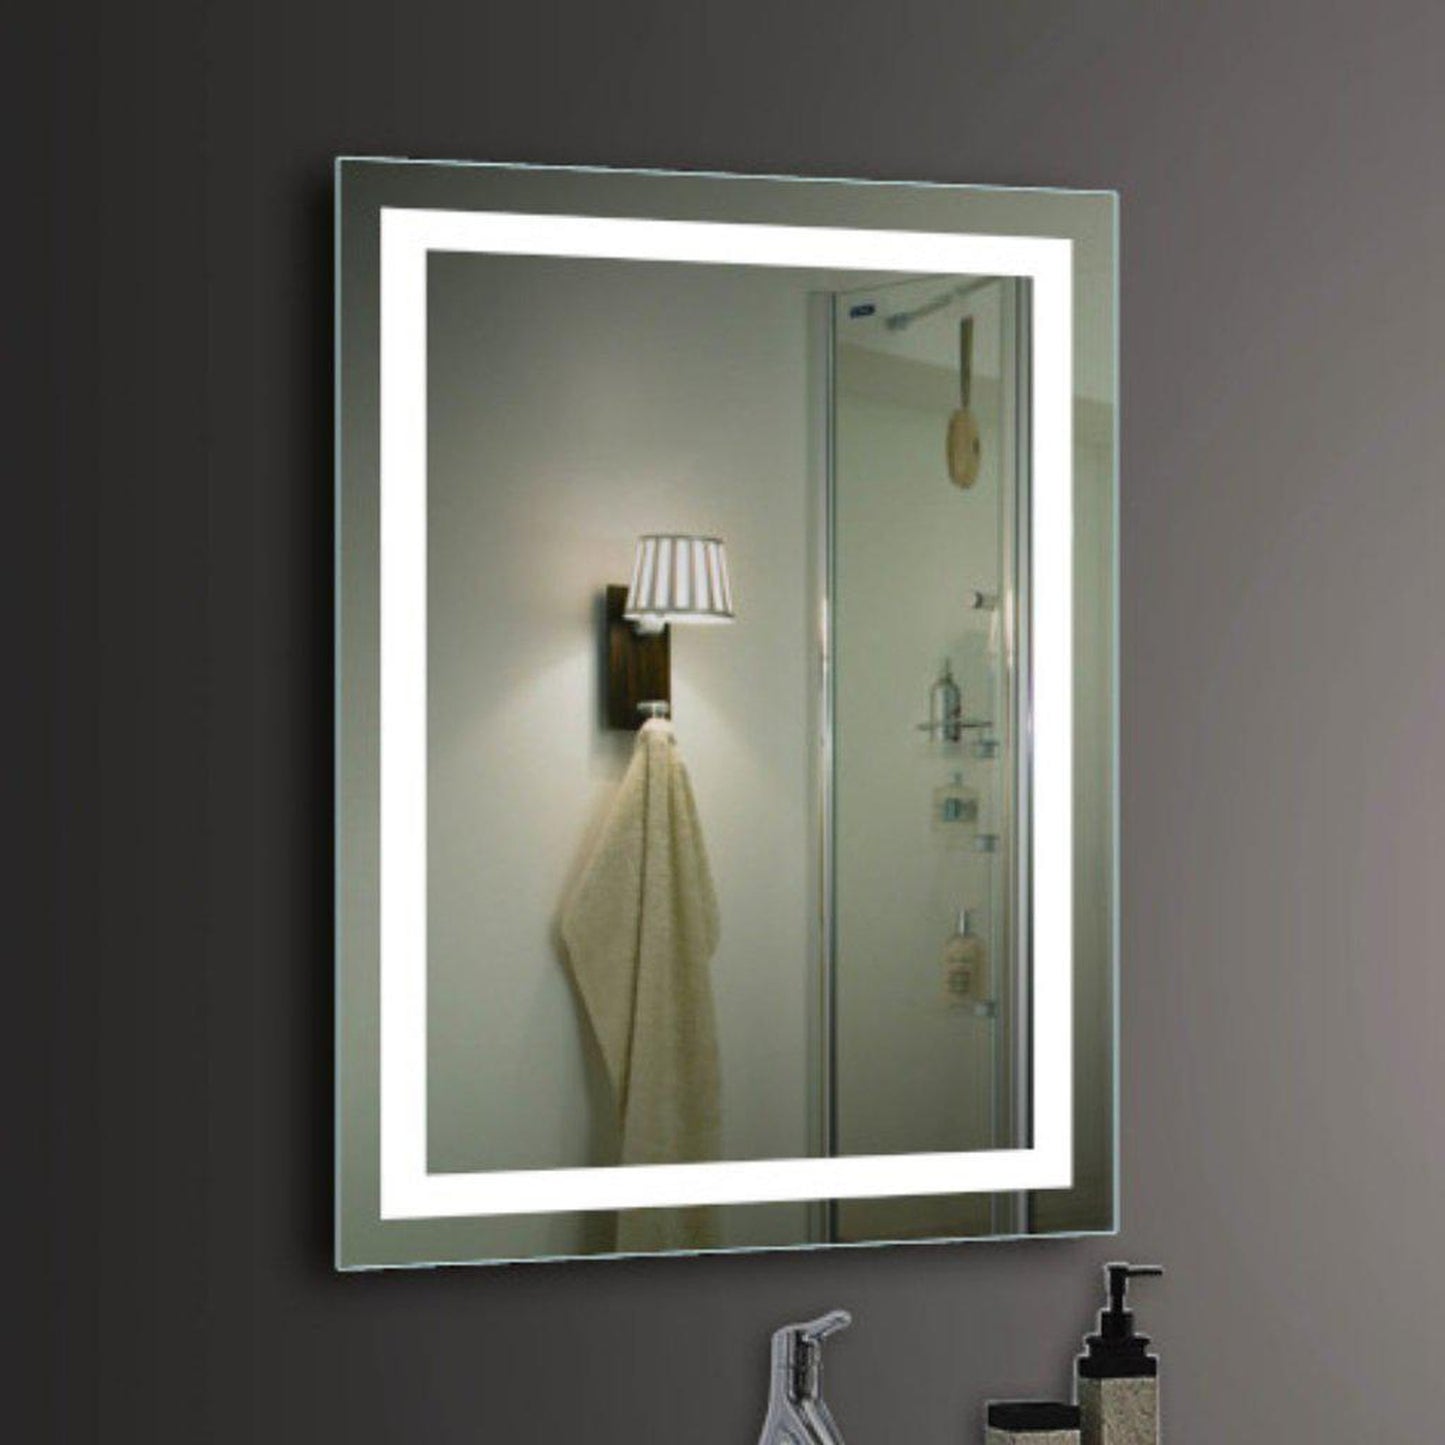 Lighted Impressions Vero 20" x 28" Rectangular Frameless Wall-Mounted LED Mirror With 3-Section Rocker Switch